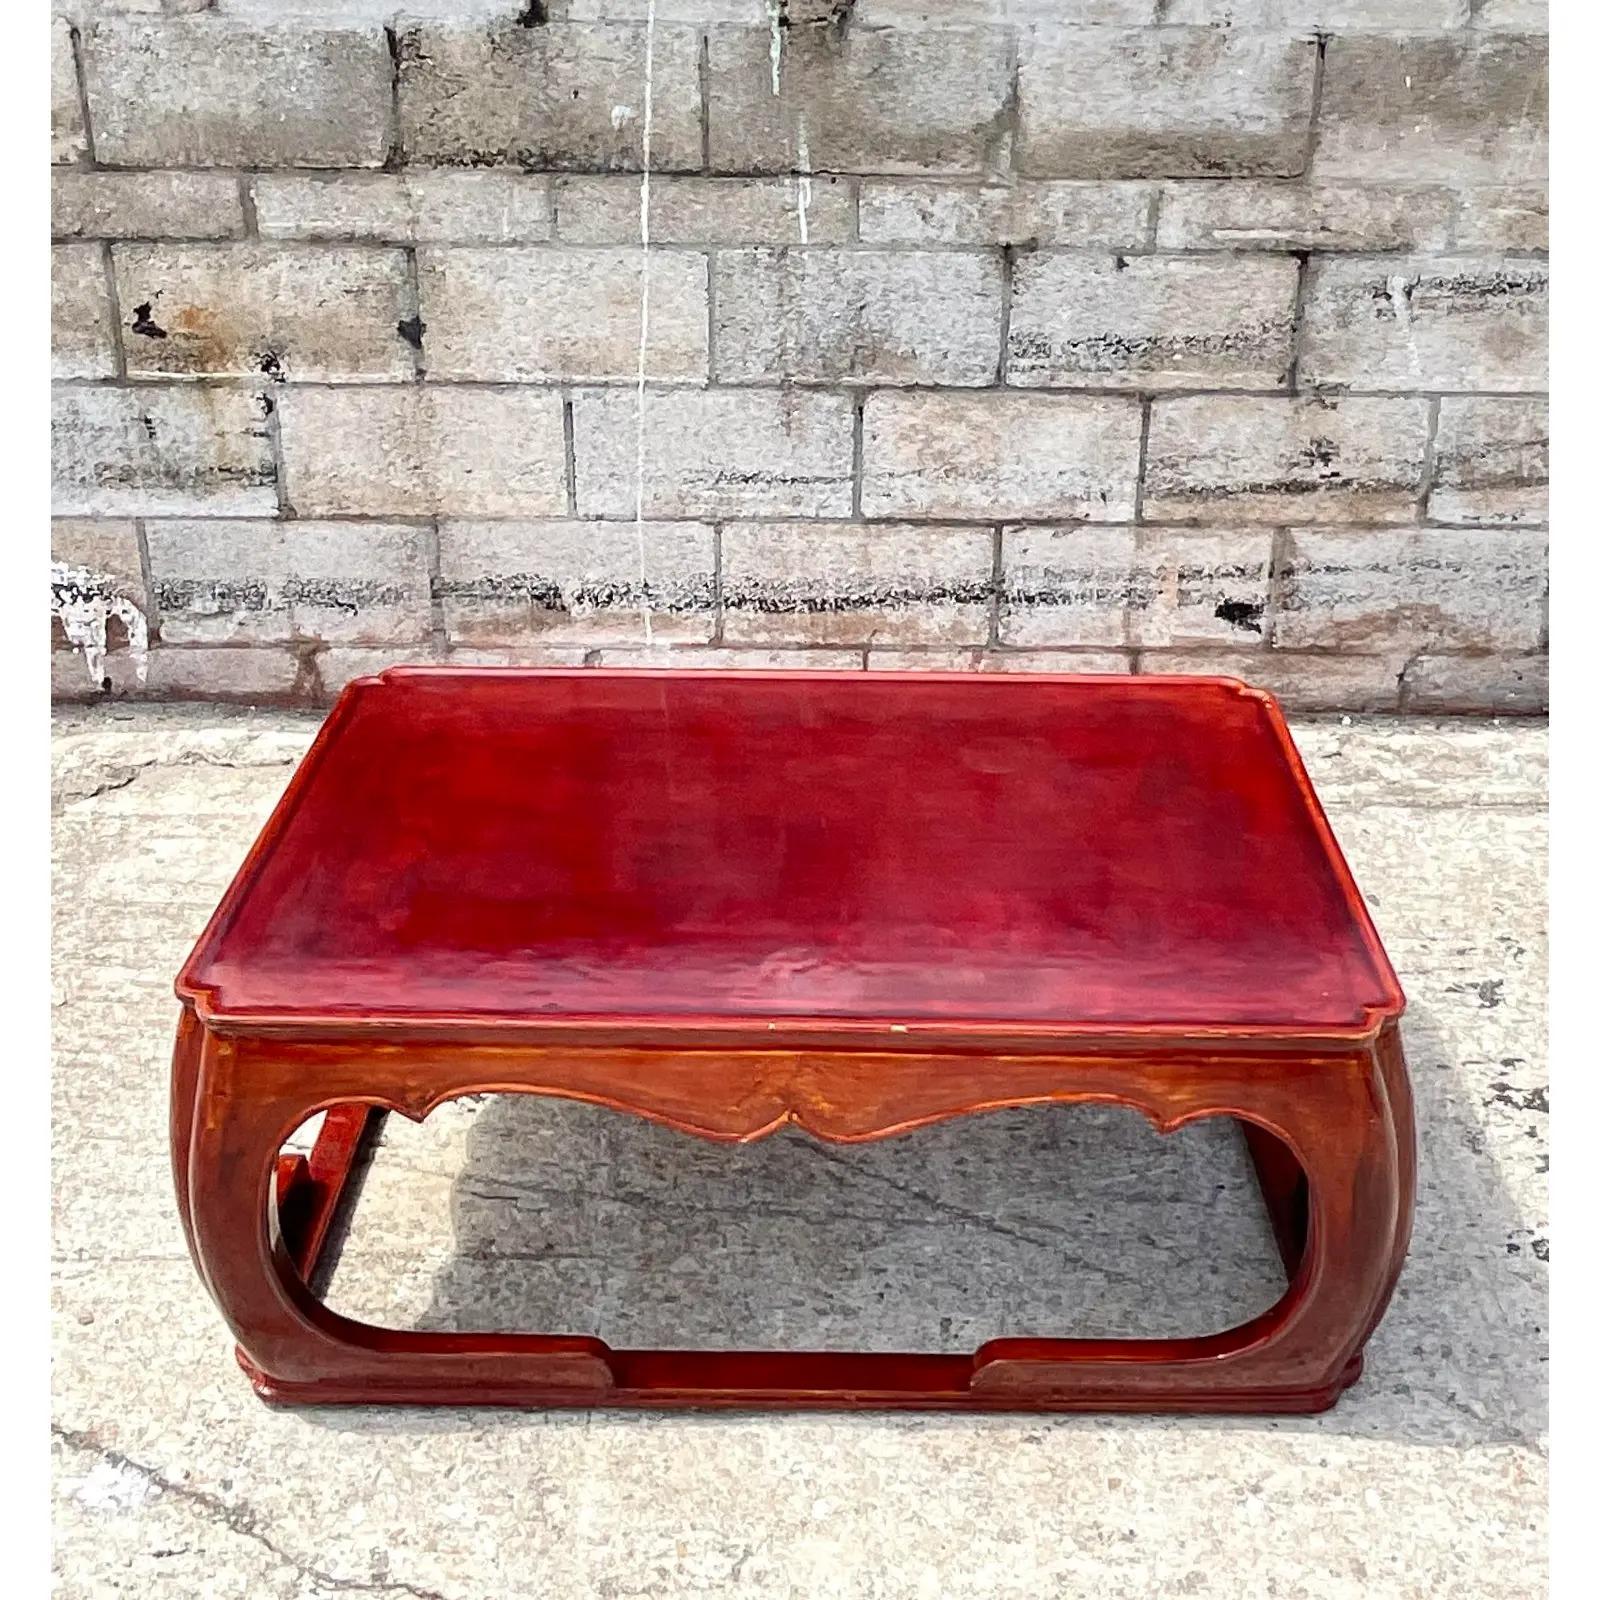 Fantastic vintage Asian coffee table. Made by the king of lacquered furniture Rae Kasian. Signed on the bottom. Beautiful iconic Ming shape in a brilliant cherry brown. Acquired from a Palm Beach estate.